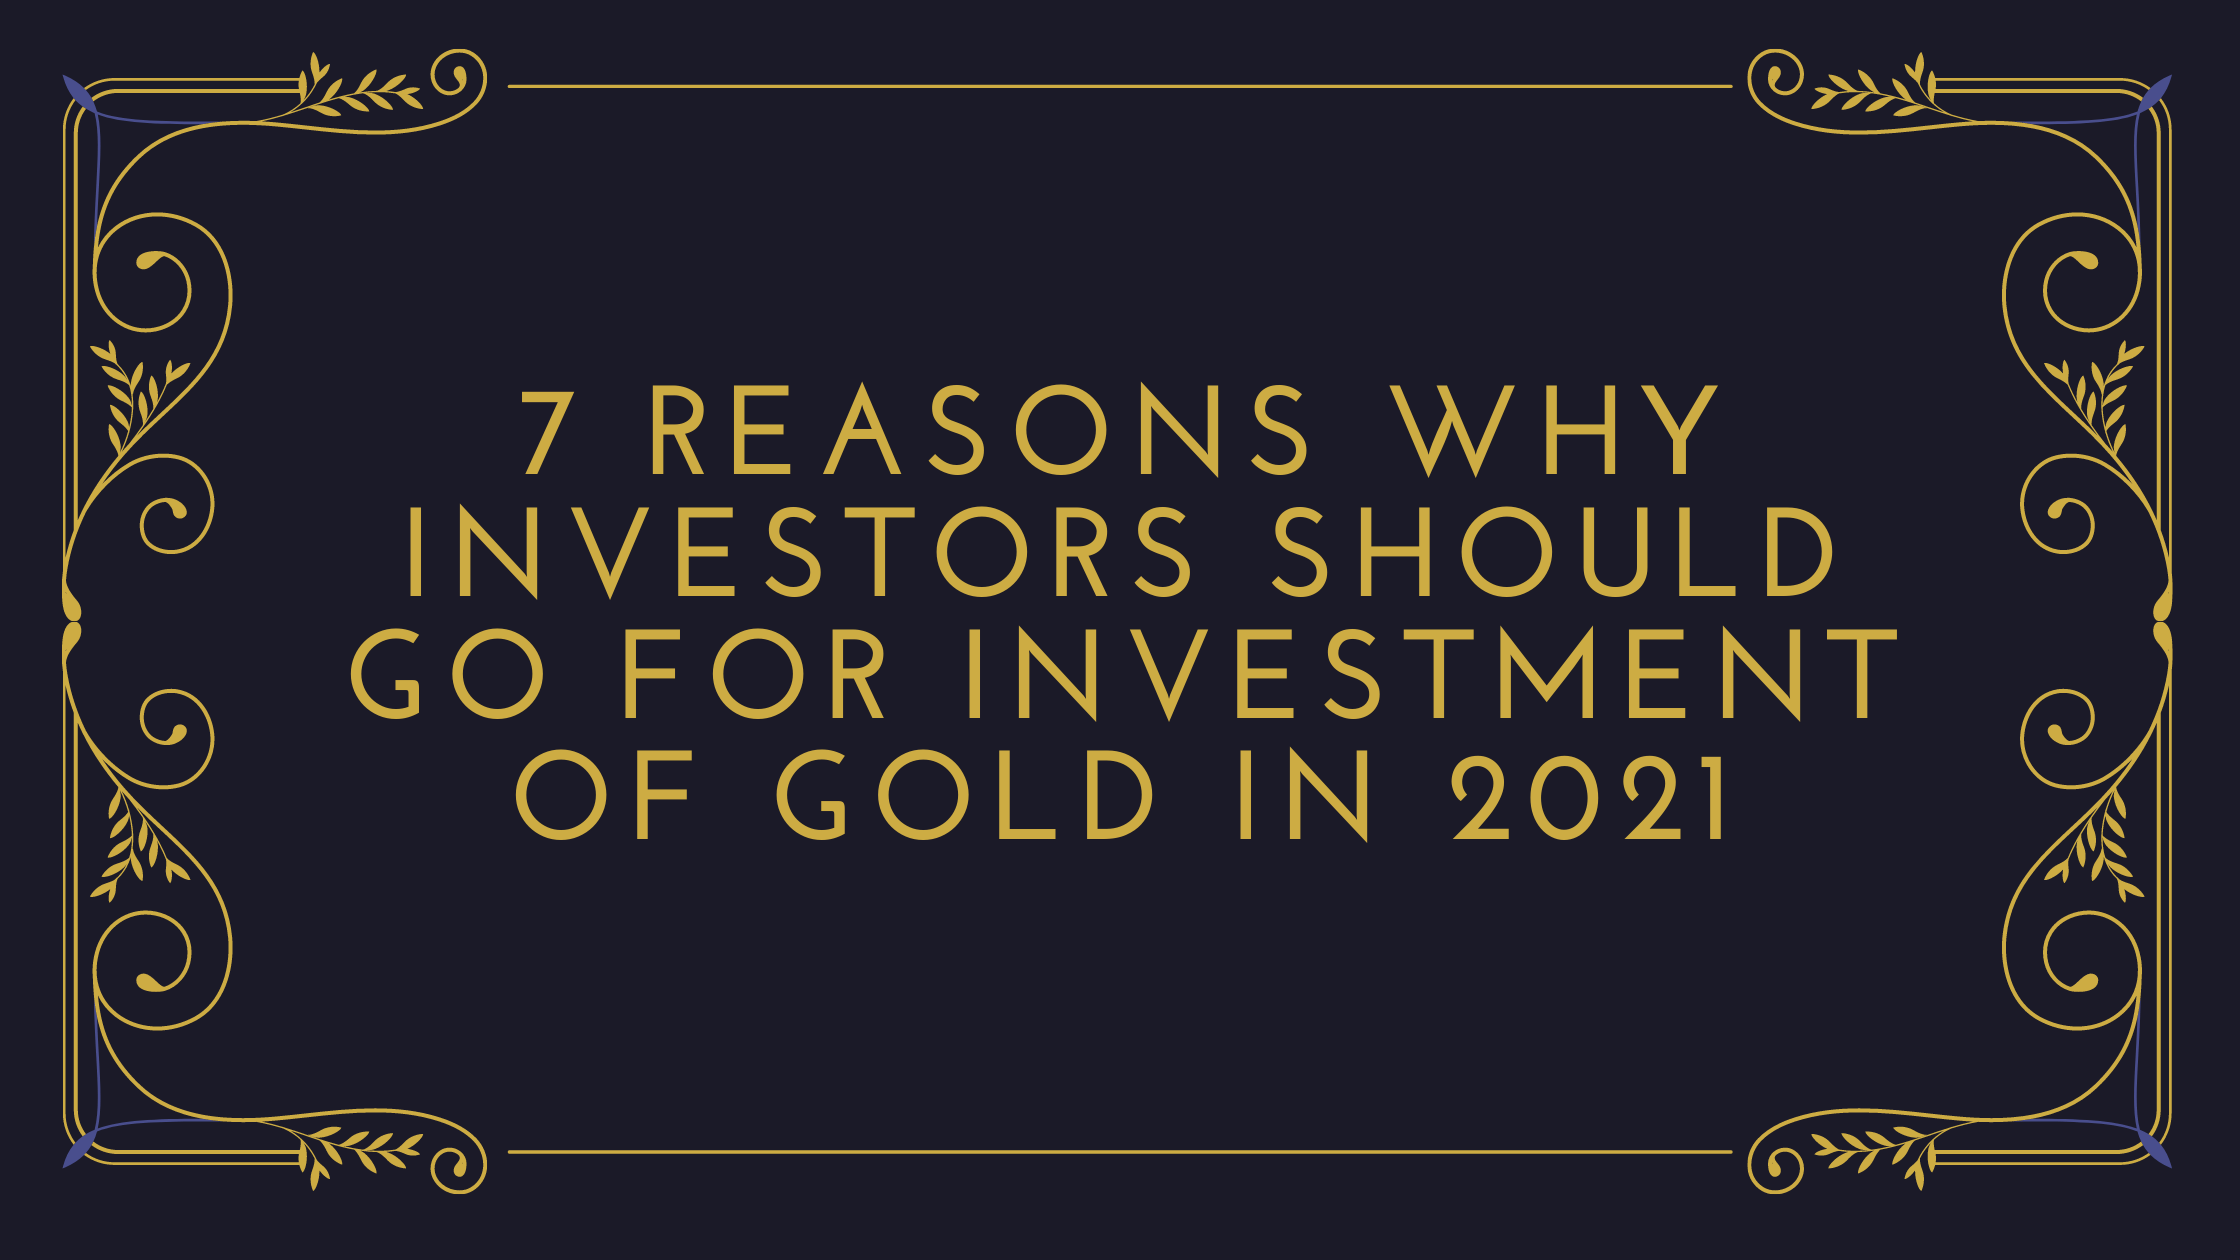 Investment of Gold in 2021